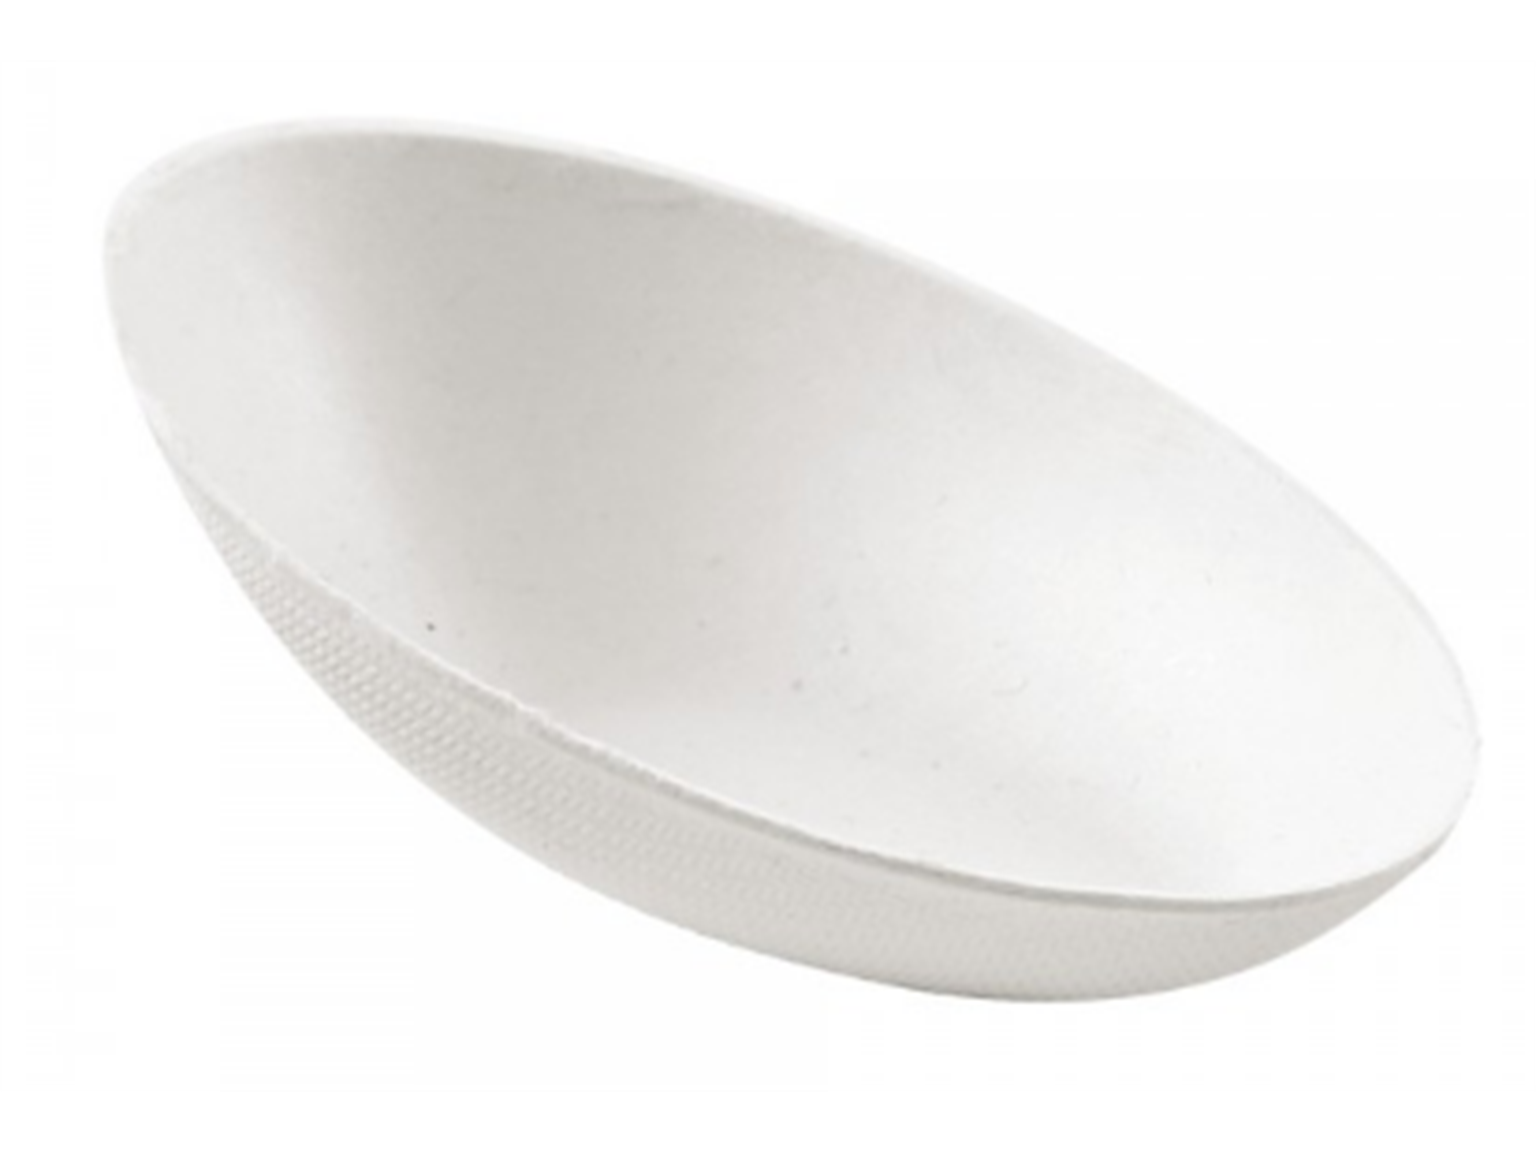 SCHALE BAGASSE FINGERFOOD  oval, 8 x 5.4 cm, weiss